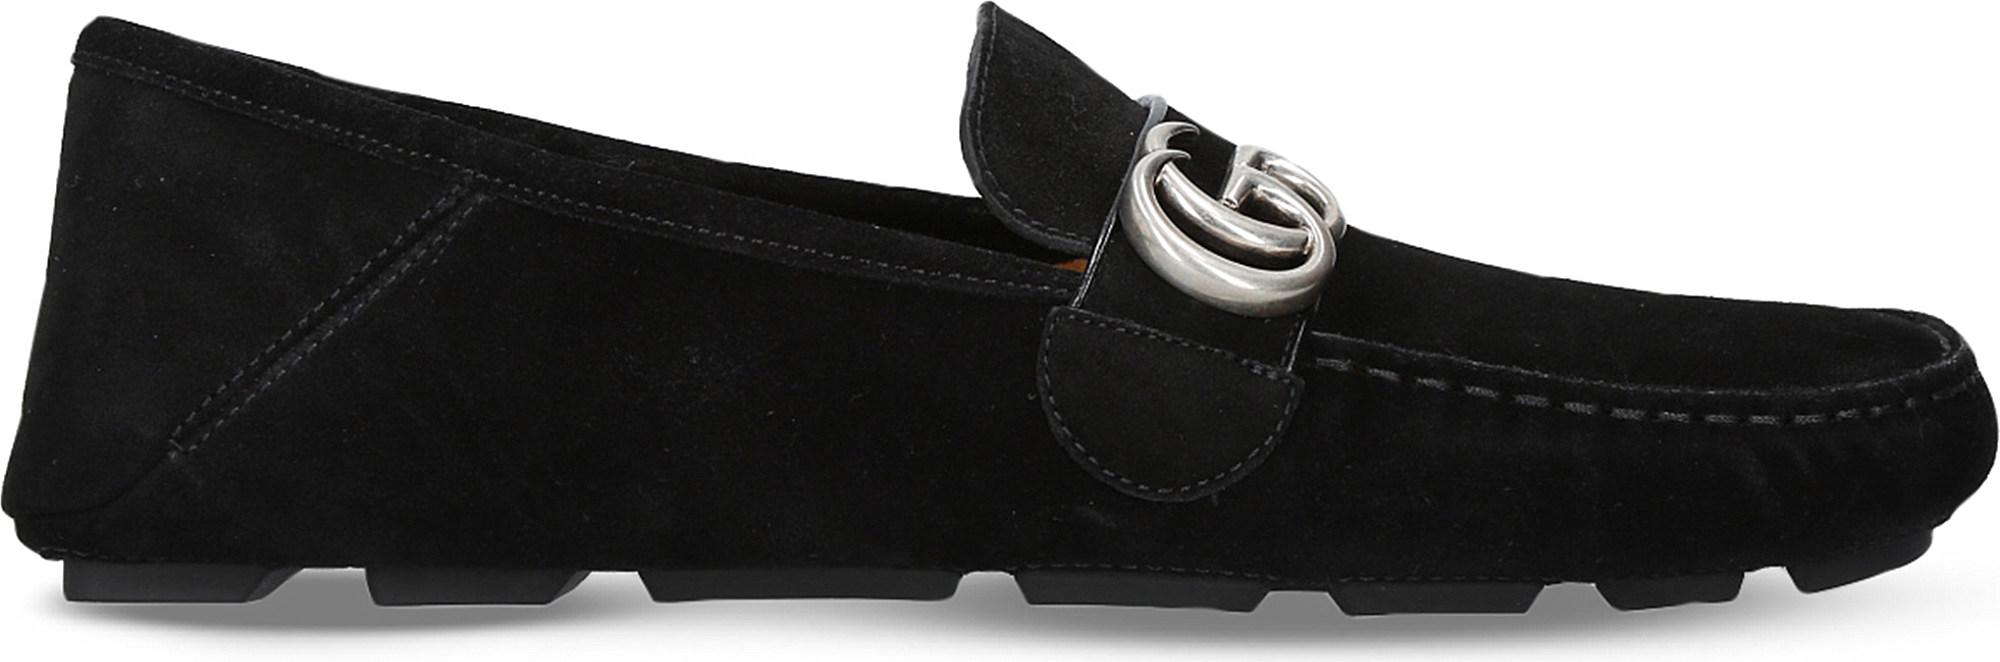 Gucci Noel Suede Driving Shoes in Black 